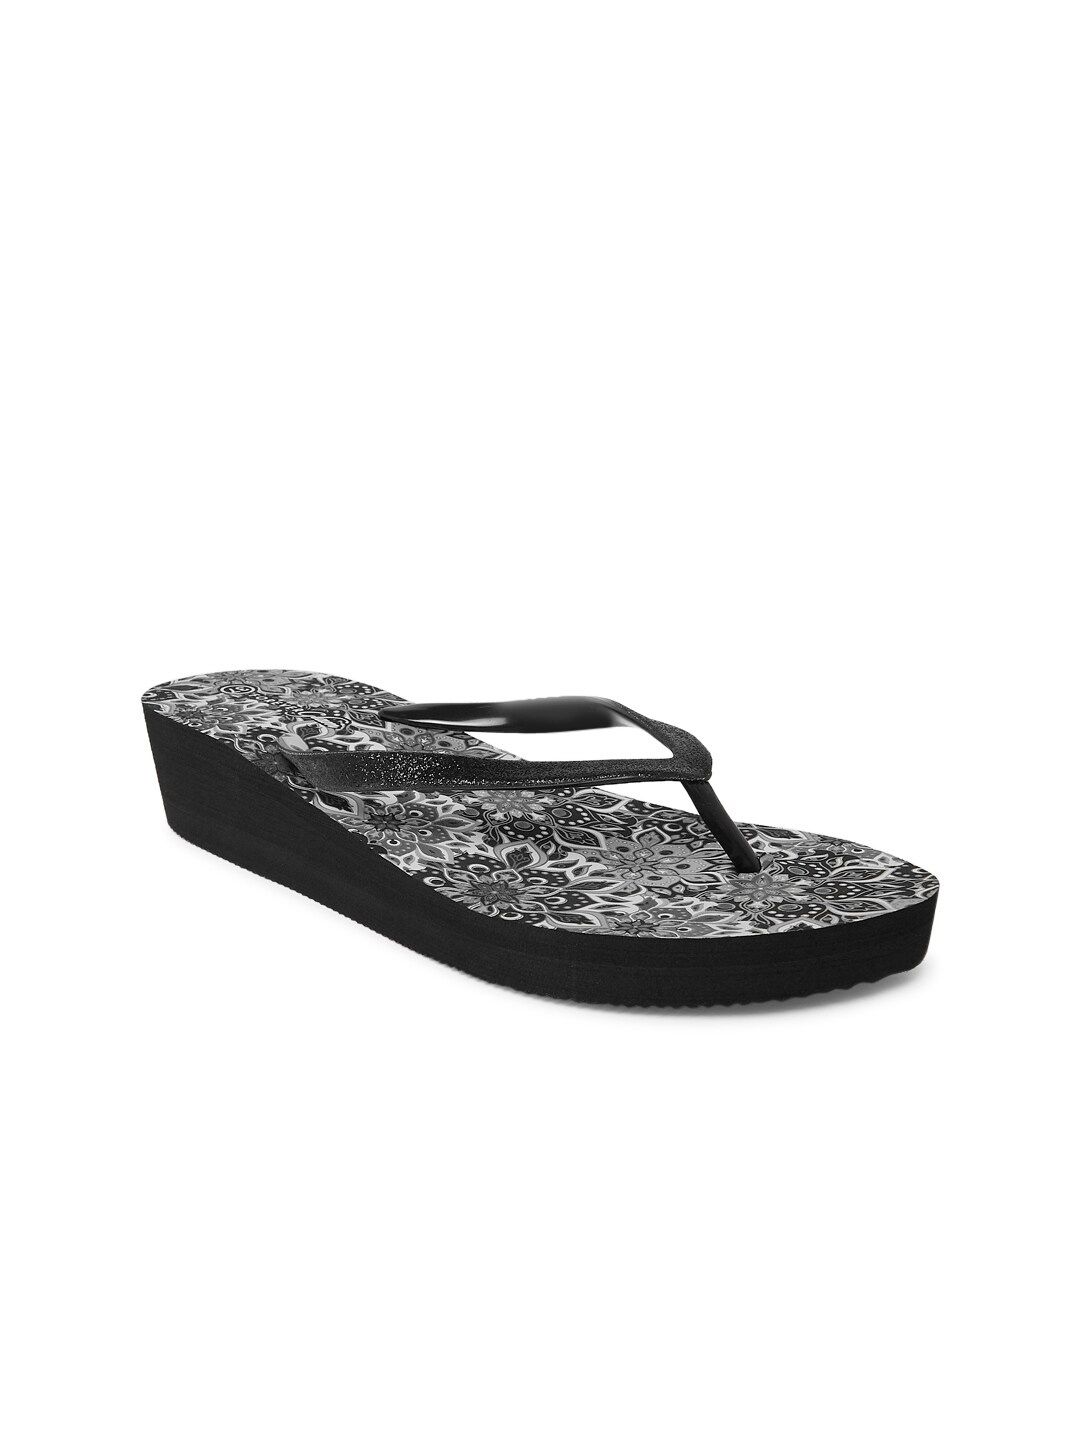 Forever Glam by Pantaloons Women Black & White Printed Thong Flip-Flops Price in India